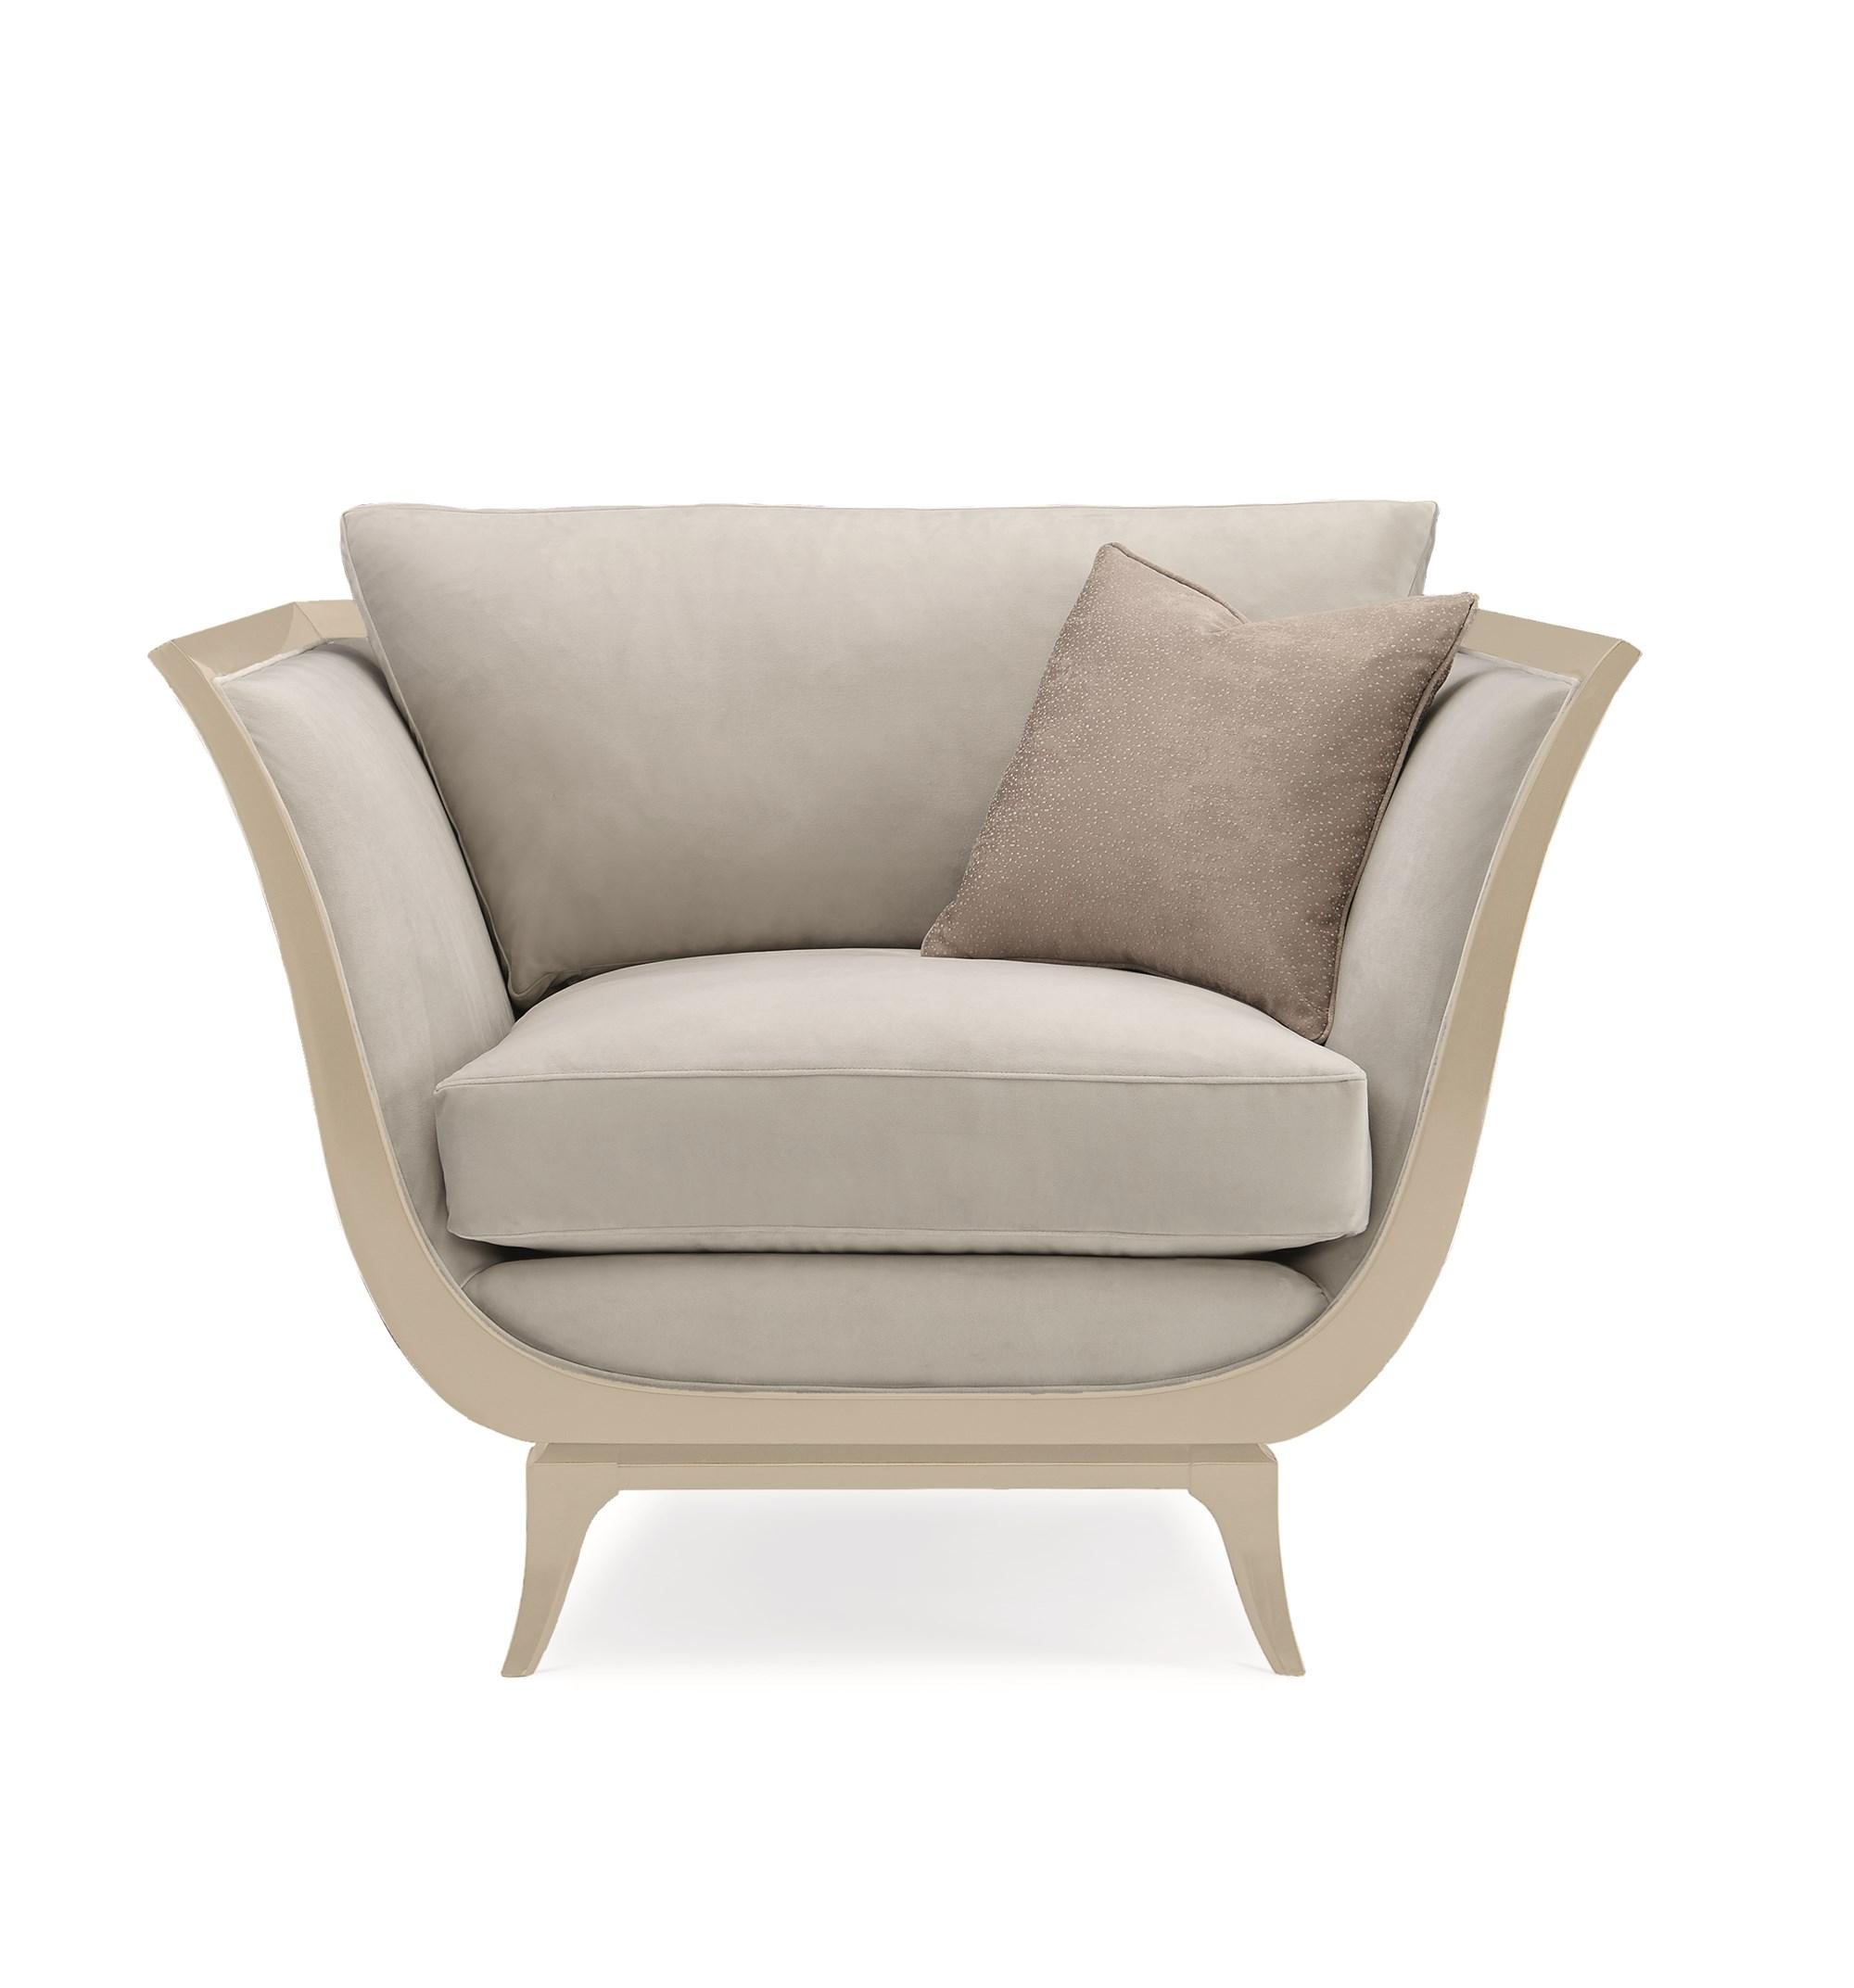 Contemporary Accent Chair LOVE A-FLAIR UPH-418-133-B in Taupe, Champagne Fabric